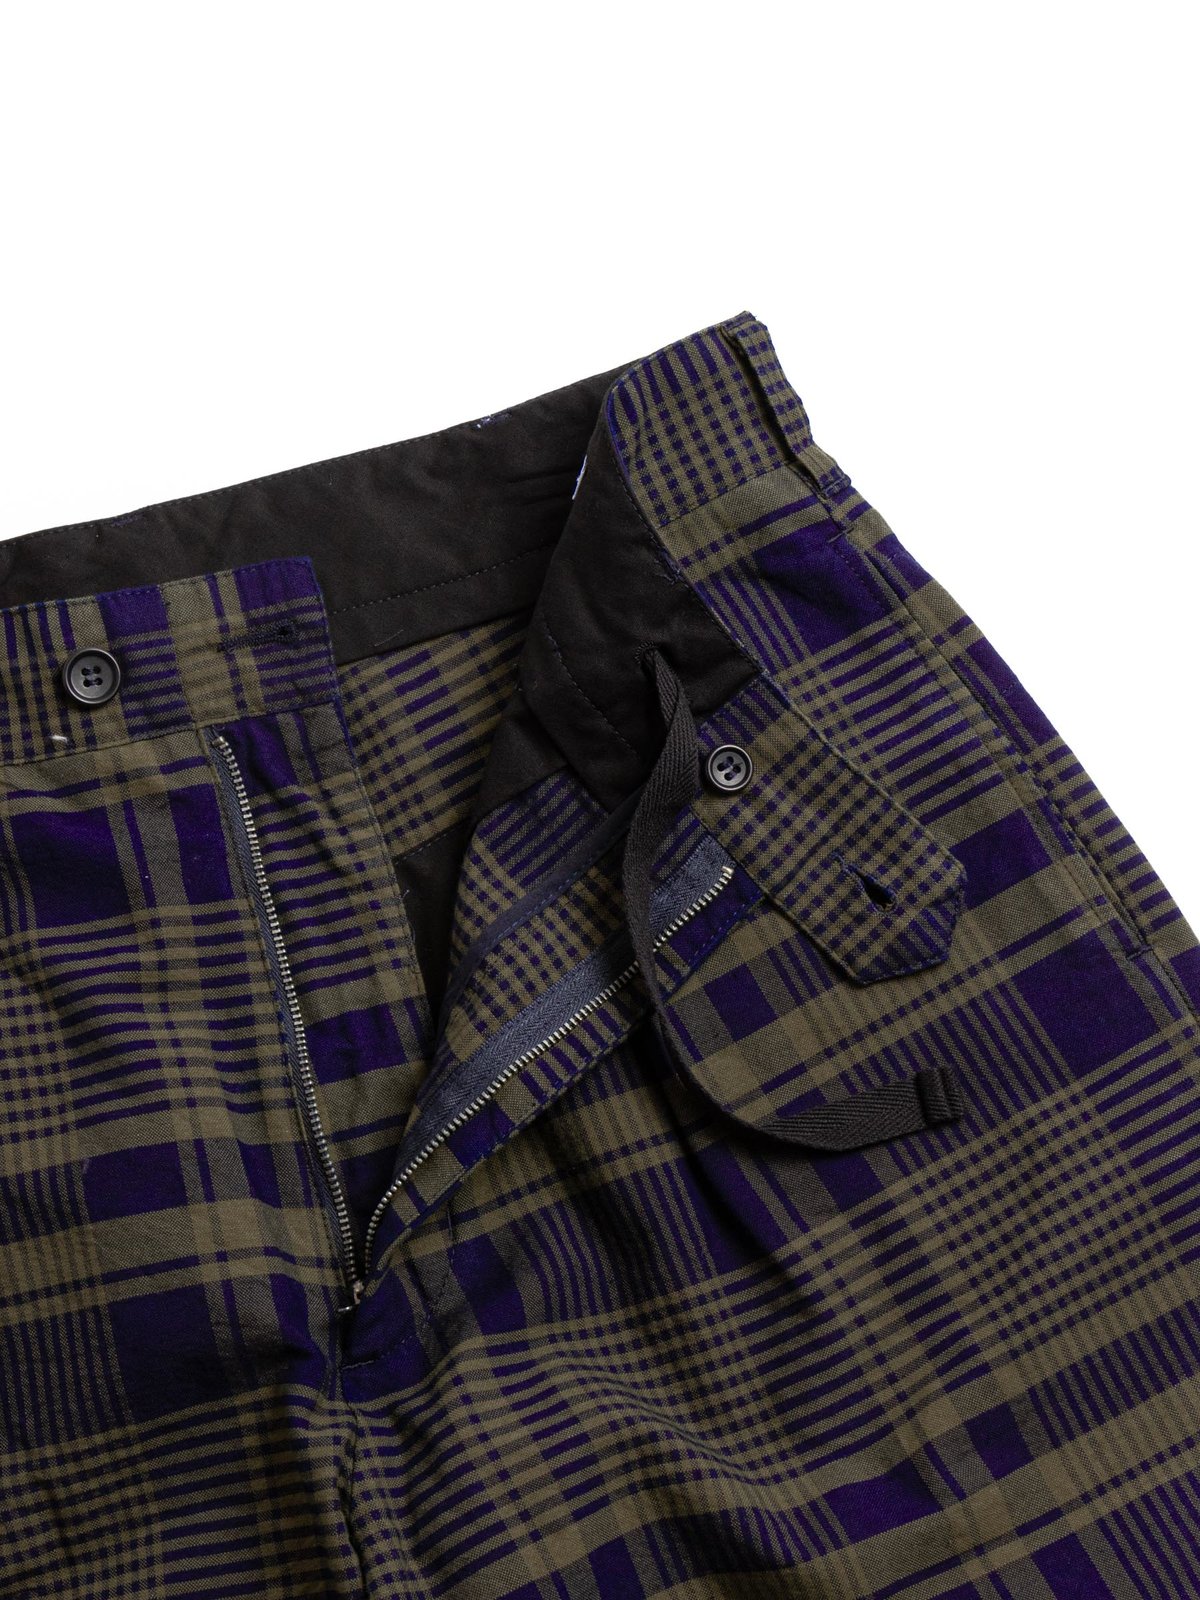 CARLYLE PANT NAVY/OLIVE COTTON PLAID - Image 3